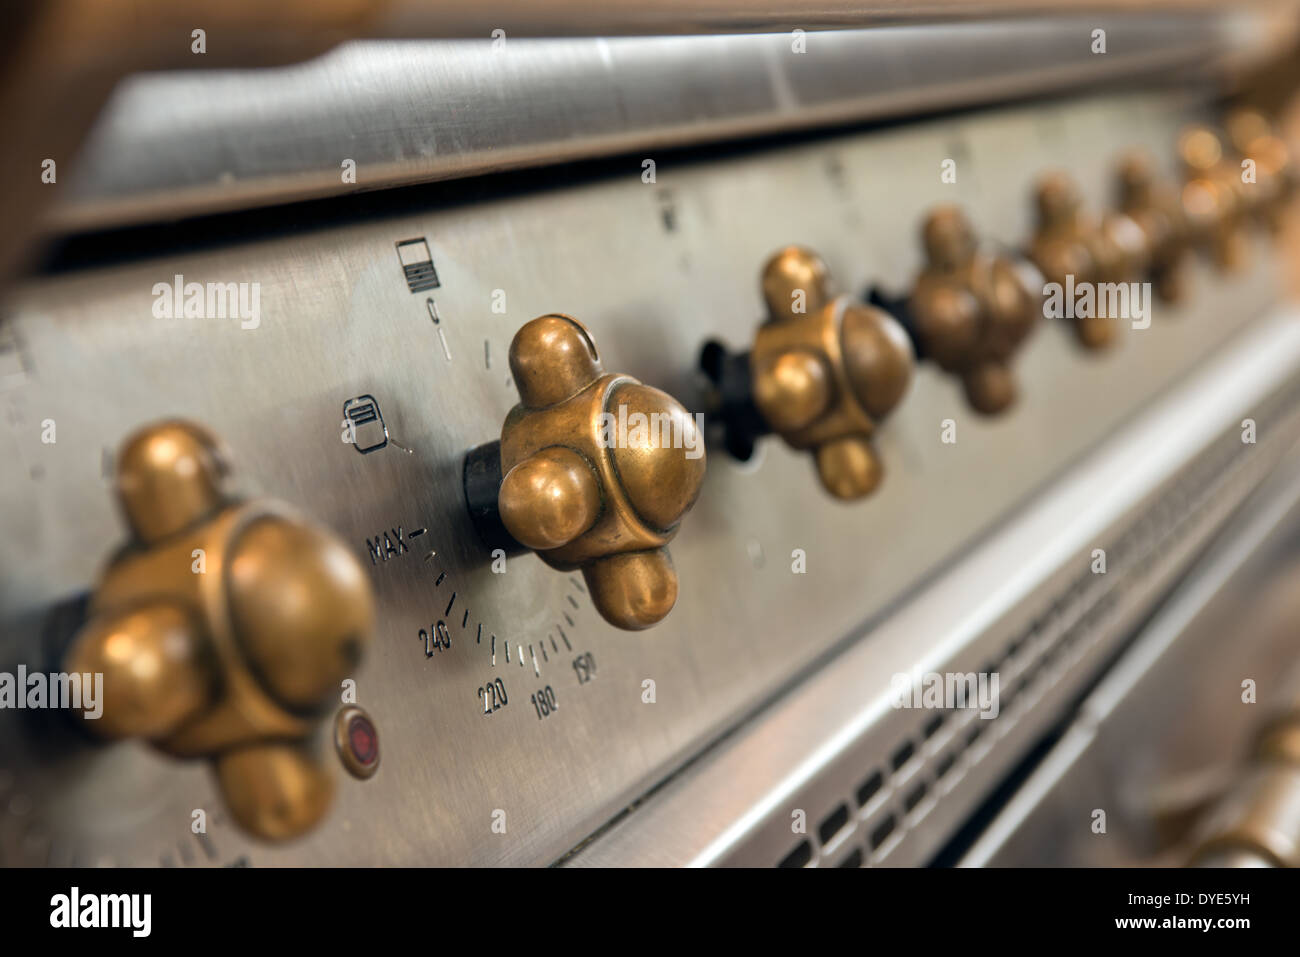 The brass knobs controlling the operation of a modern gas range cooker Stock Photo